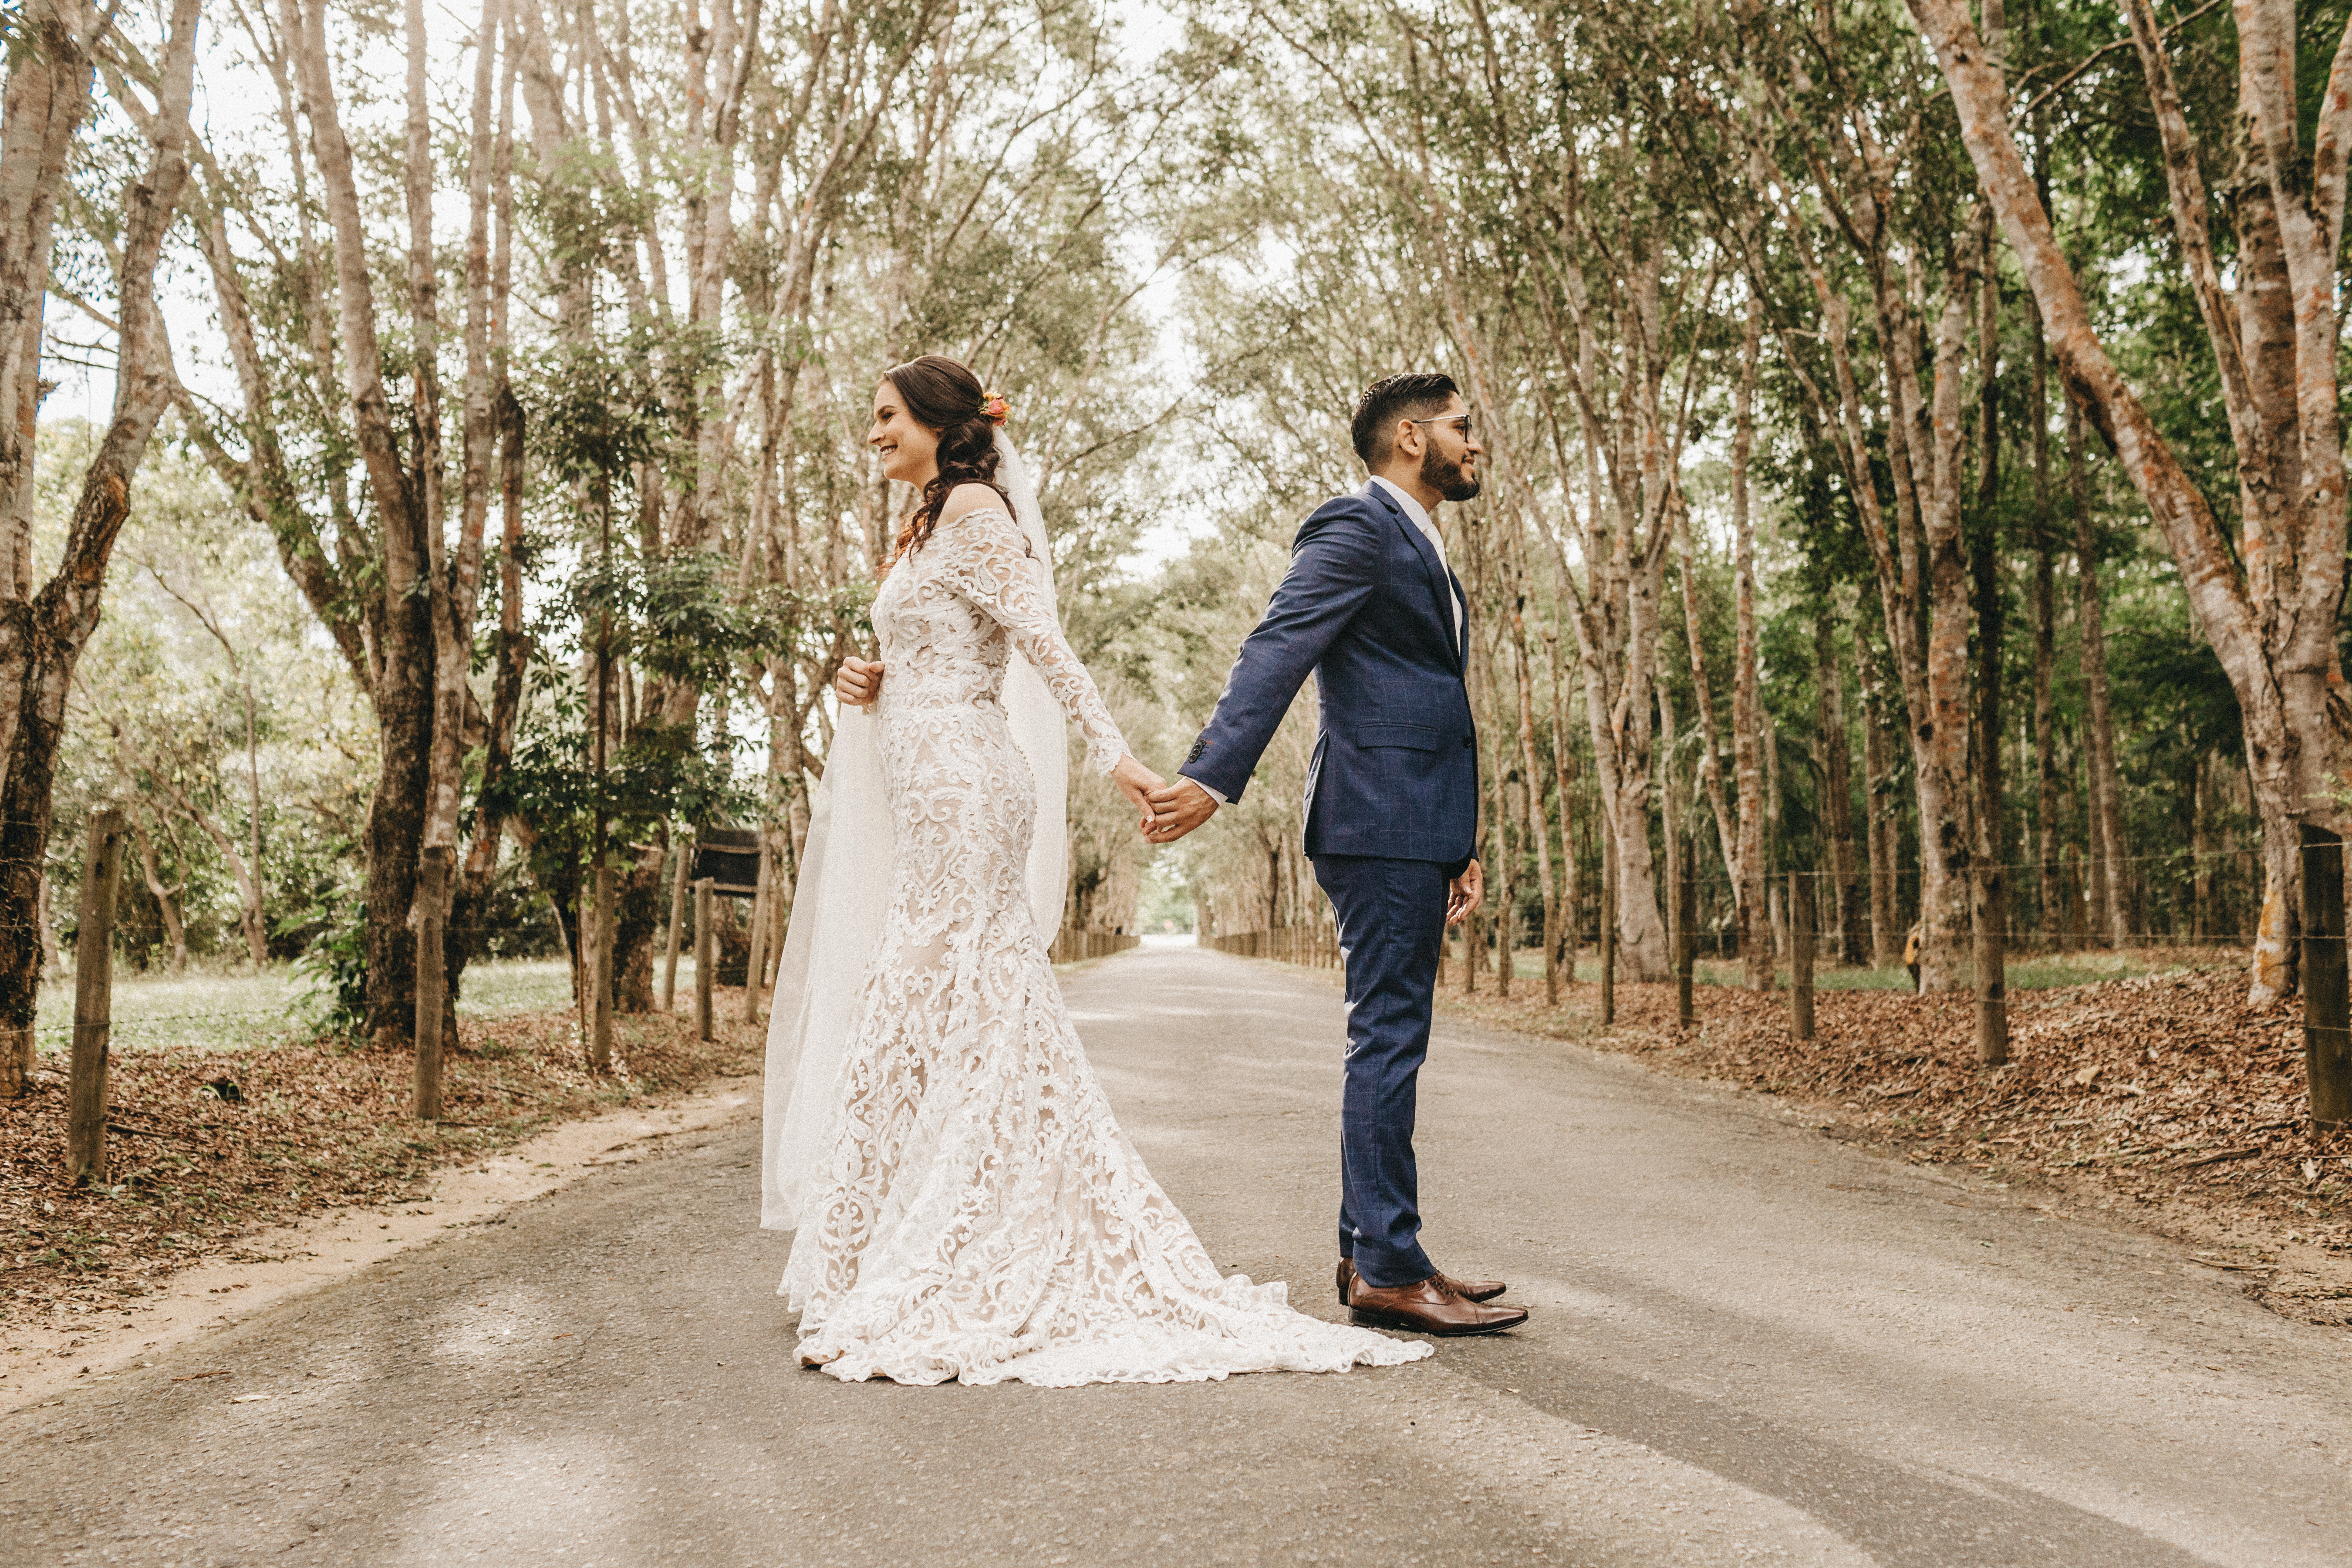 man in black suit jacket and woman in white wedding dress walking on road during daytime